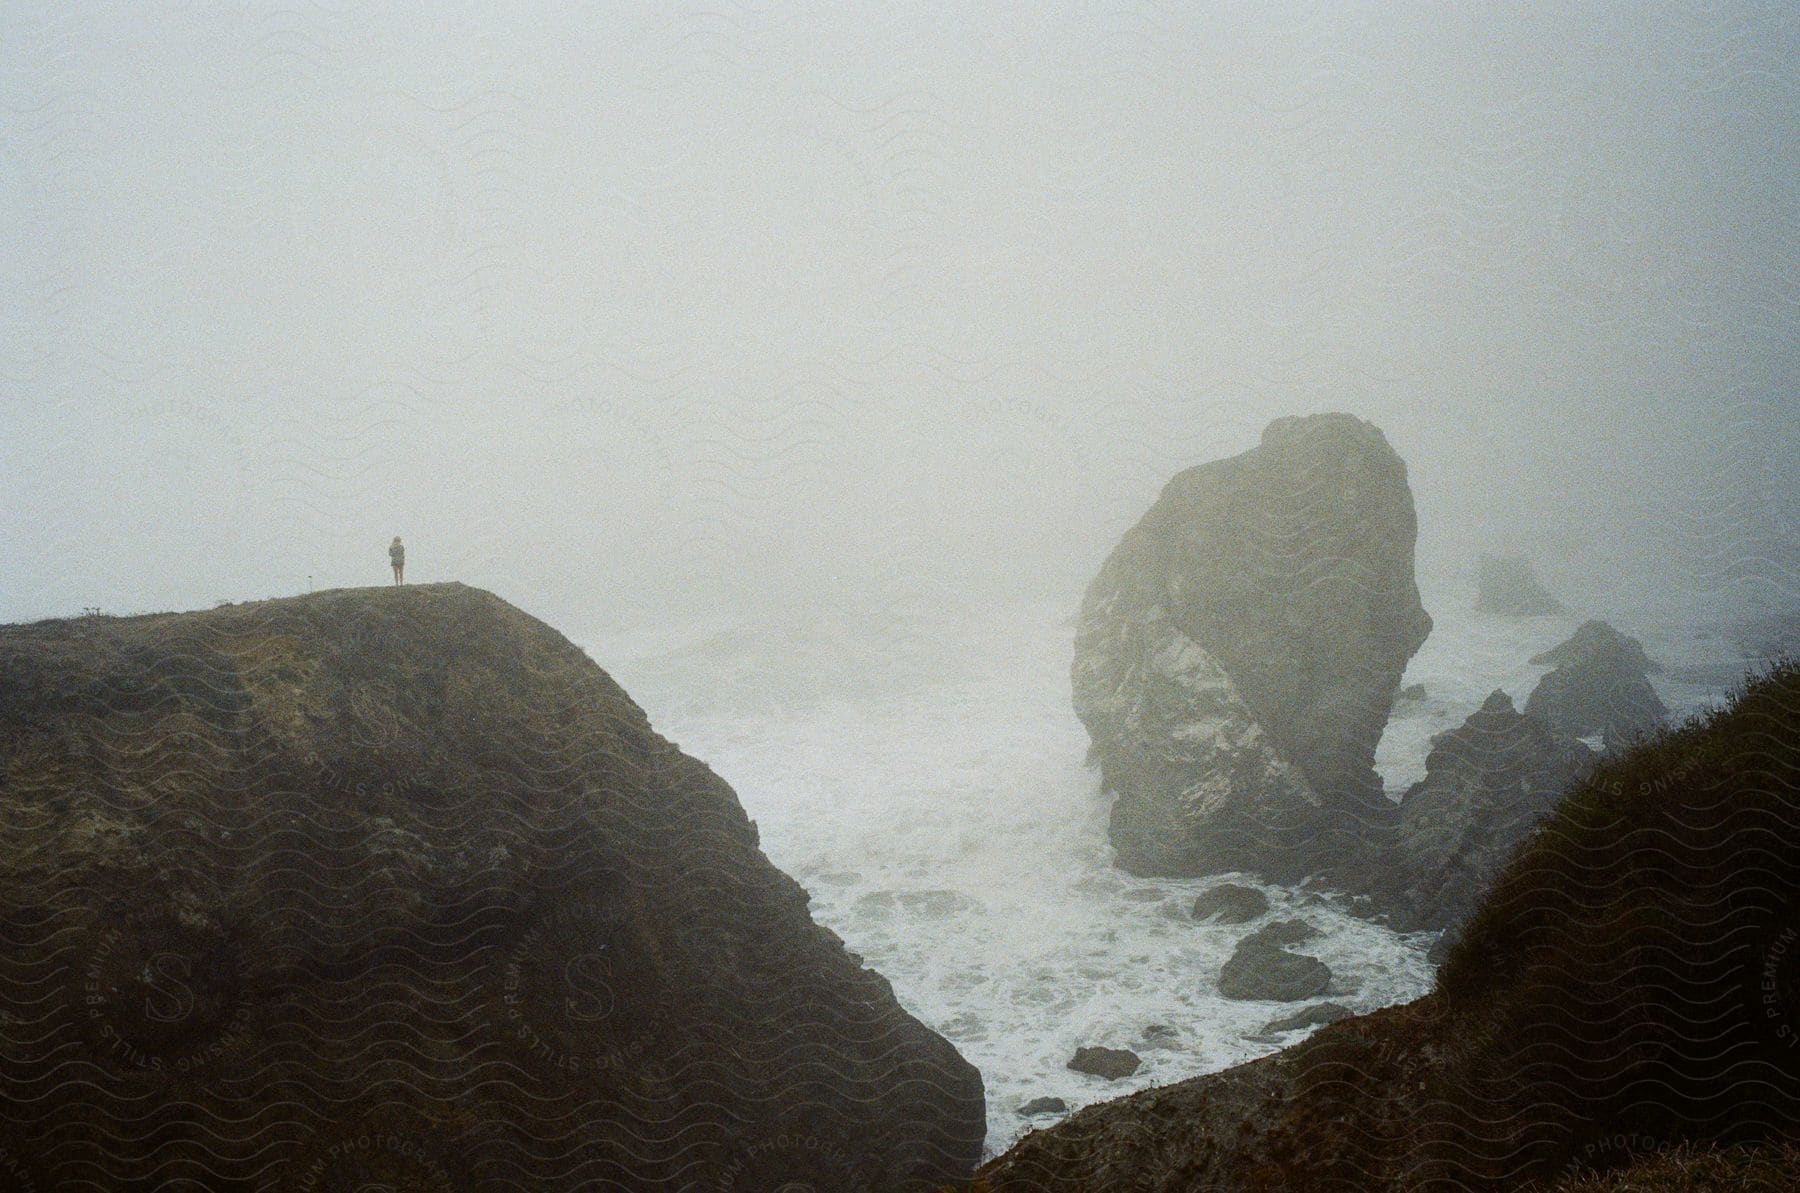 A person standing at the edge of a cliff on the sea